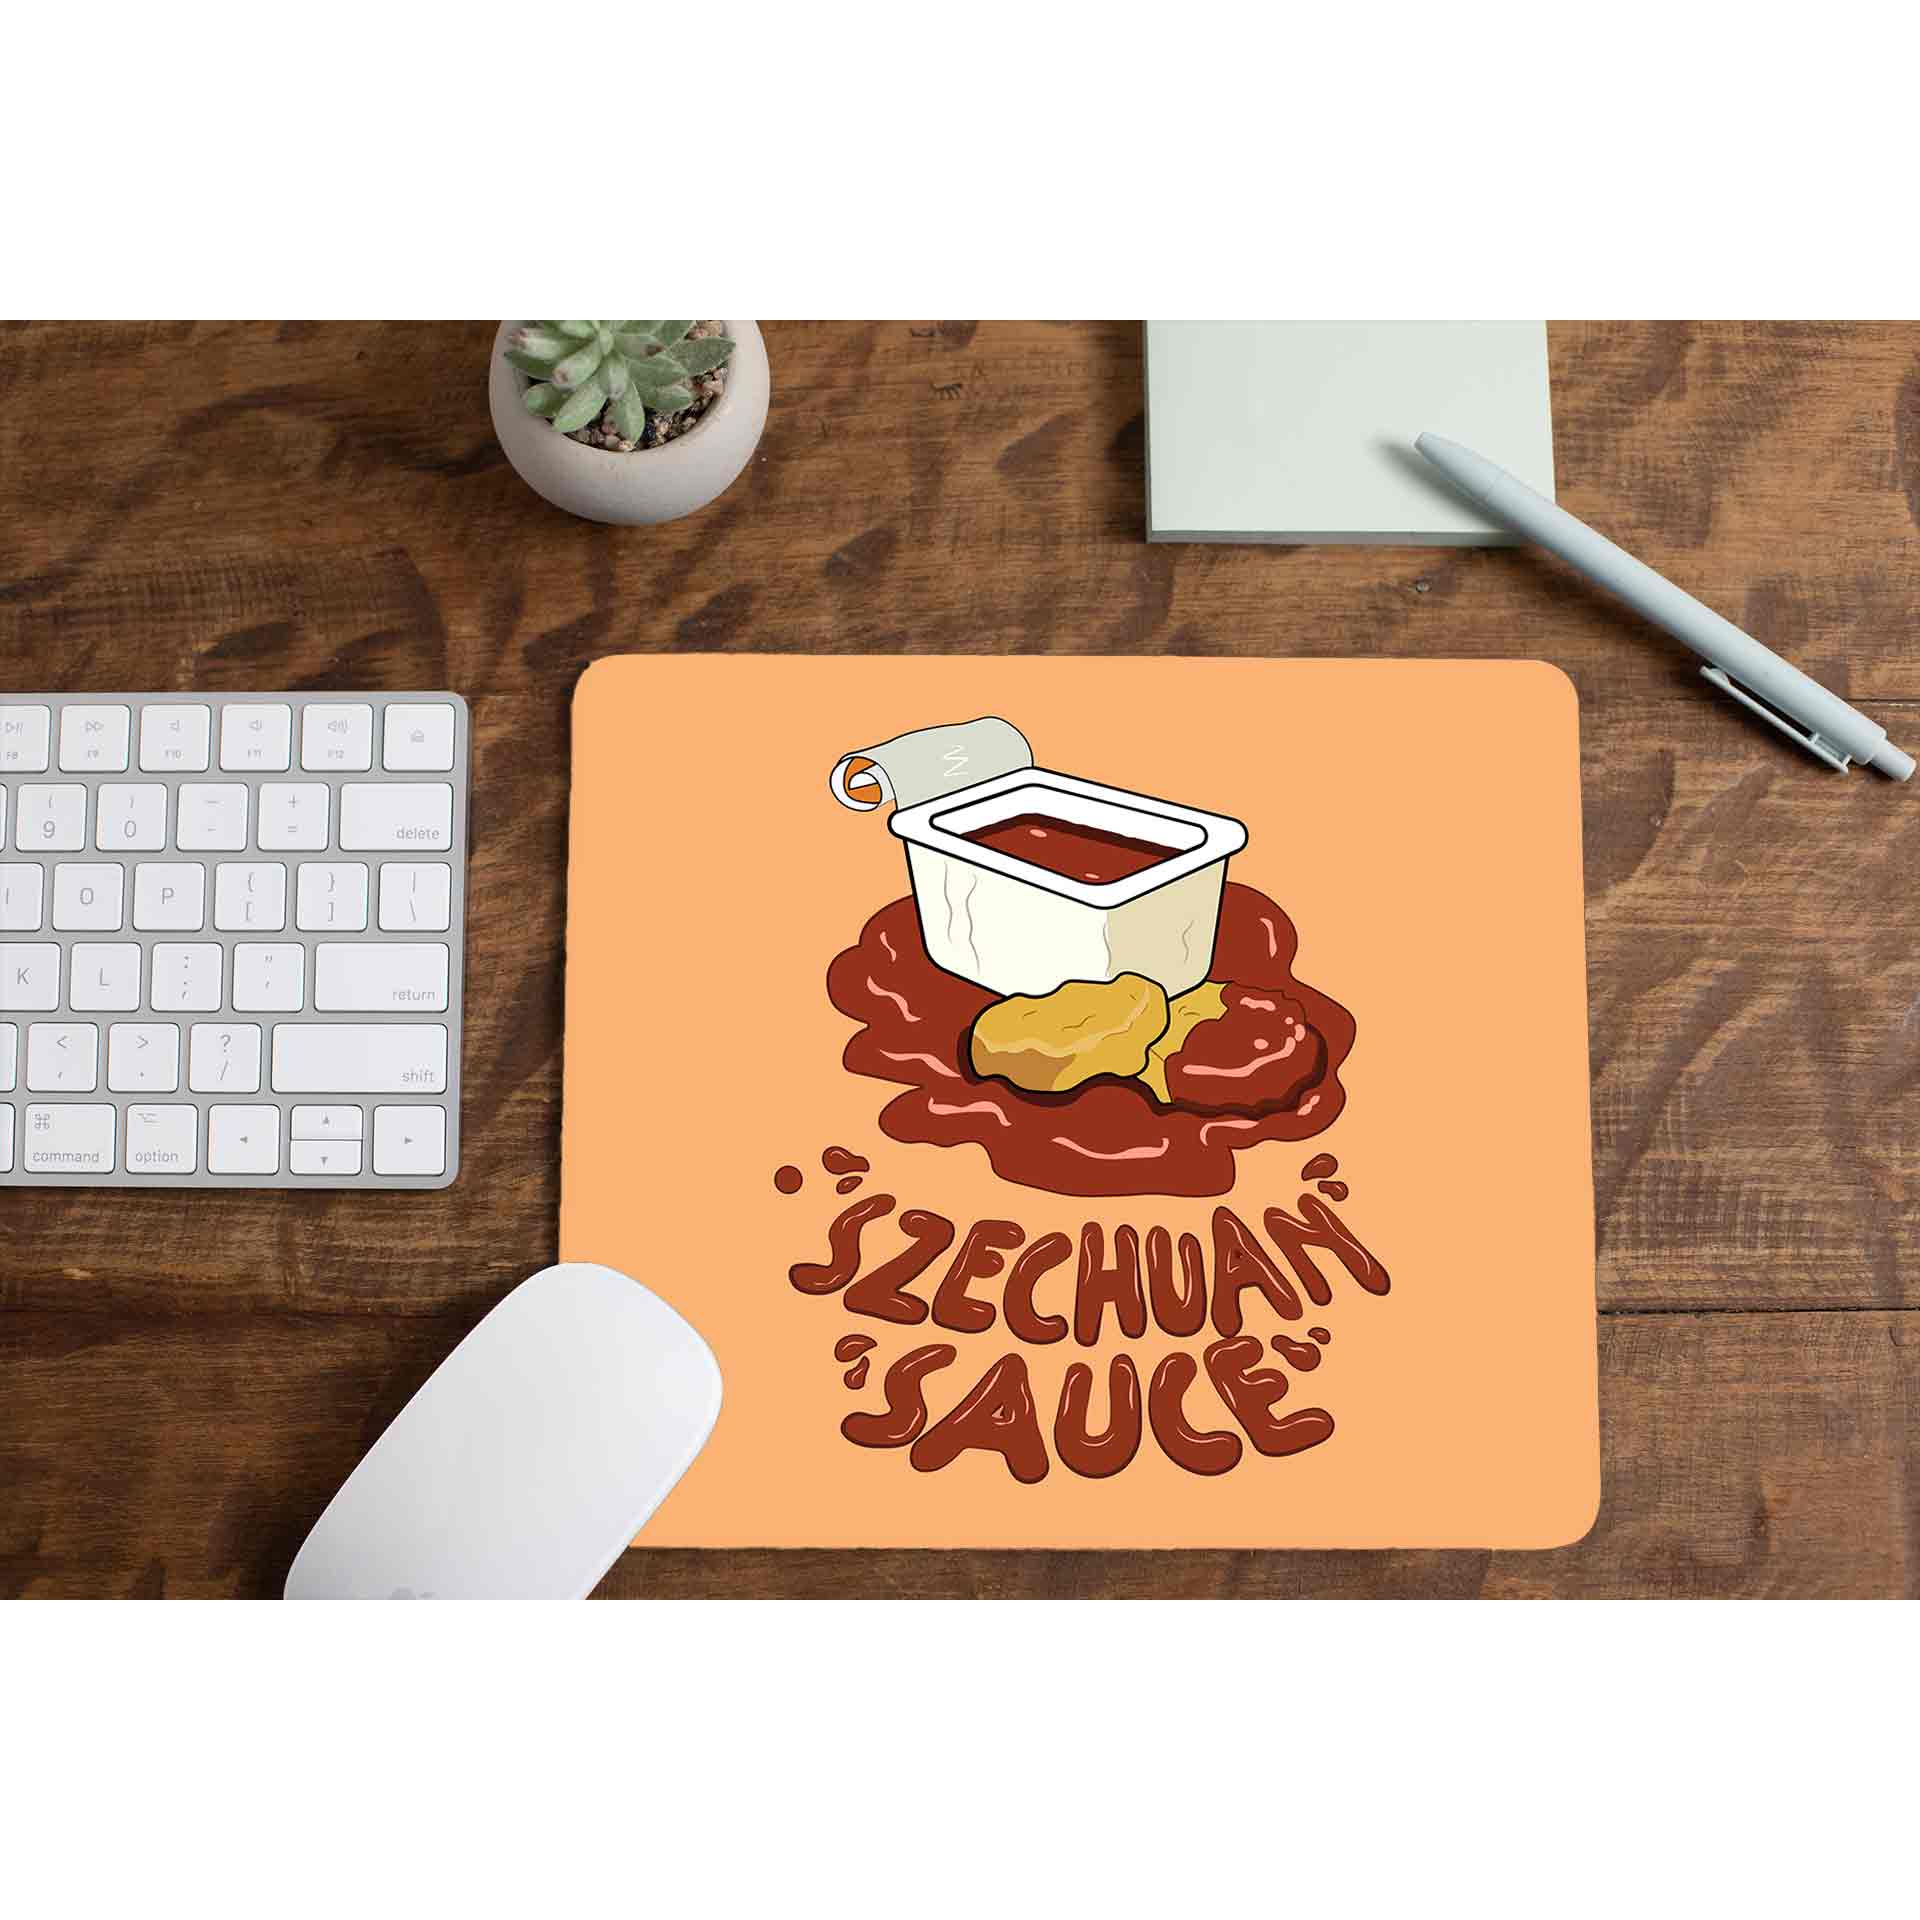 rick and morty szechuan sauce mousepad logitech large anime buy online india the banyan tee tbt men women girls boys unisex  rick and morty online summer beth mr meeseeks jerry quote vector art clothing accessories merchandise